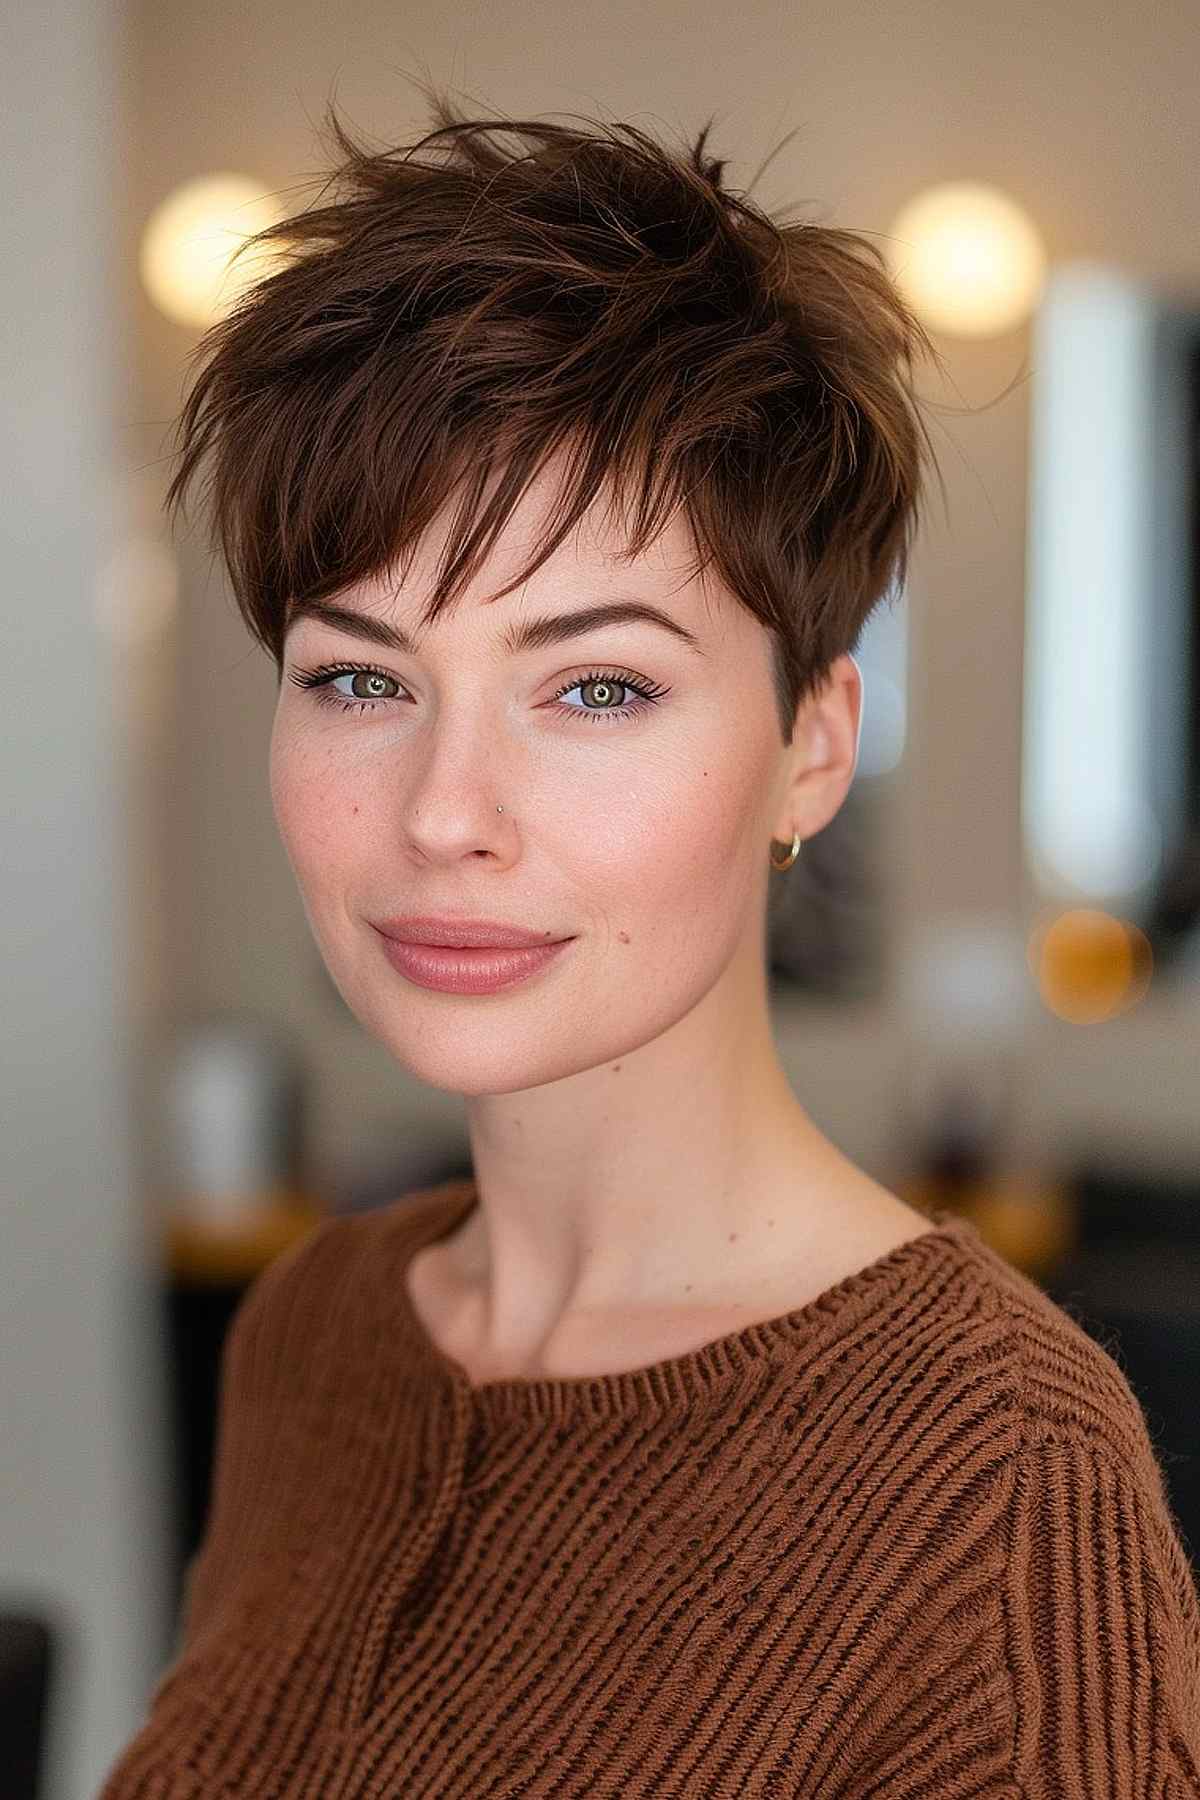 Woman wearing a brown sweater smiles gently, her brunette feathered pixie cut styled with soft layers and textured bangs for a natural, low-maintenance look.